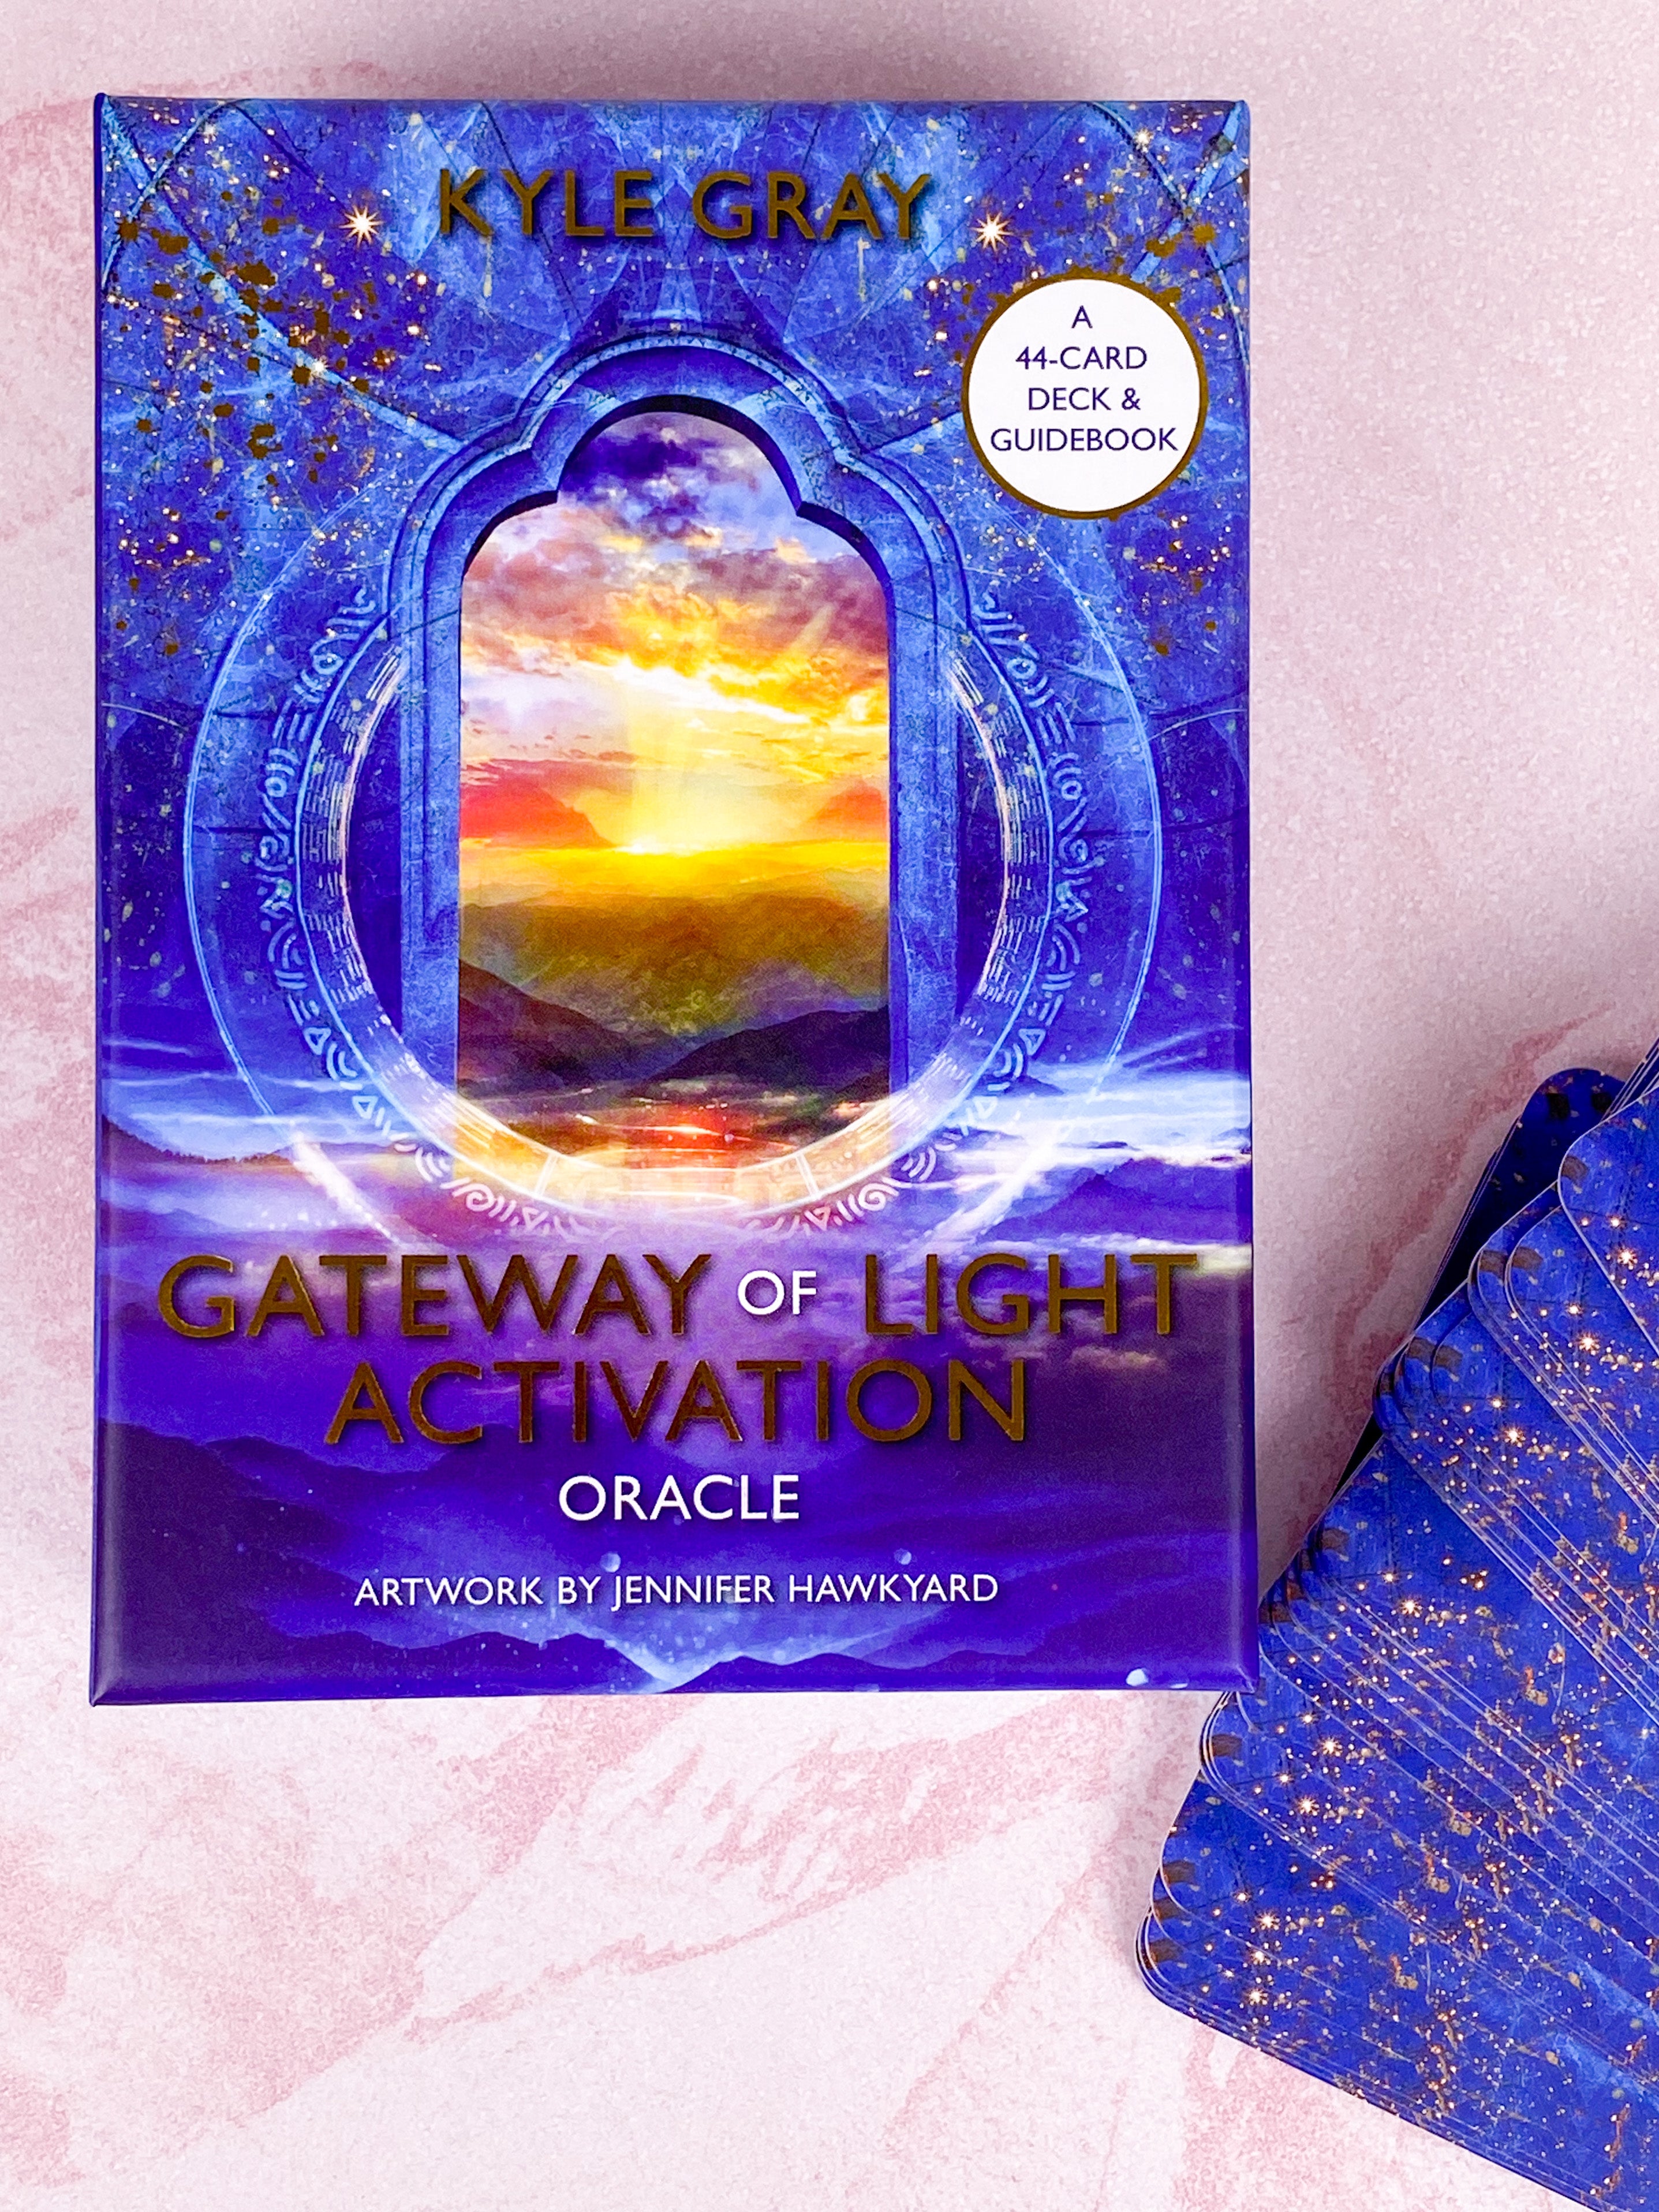 Gateway of Light Activation - Kyle Gray